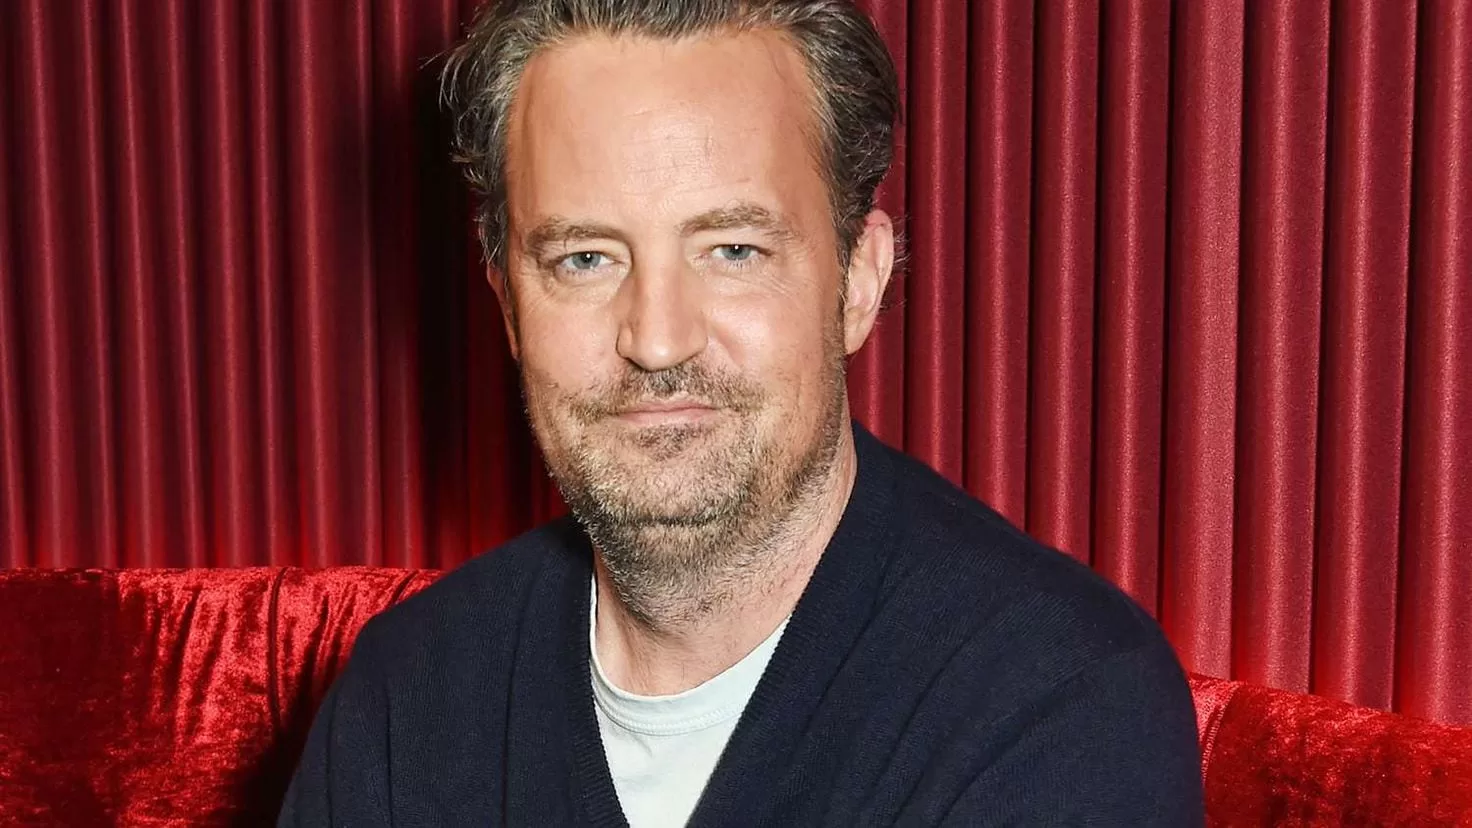 Matthew Perry reportedly used dating apps to get drugs: He asked if they could get him some
